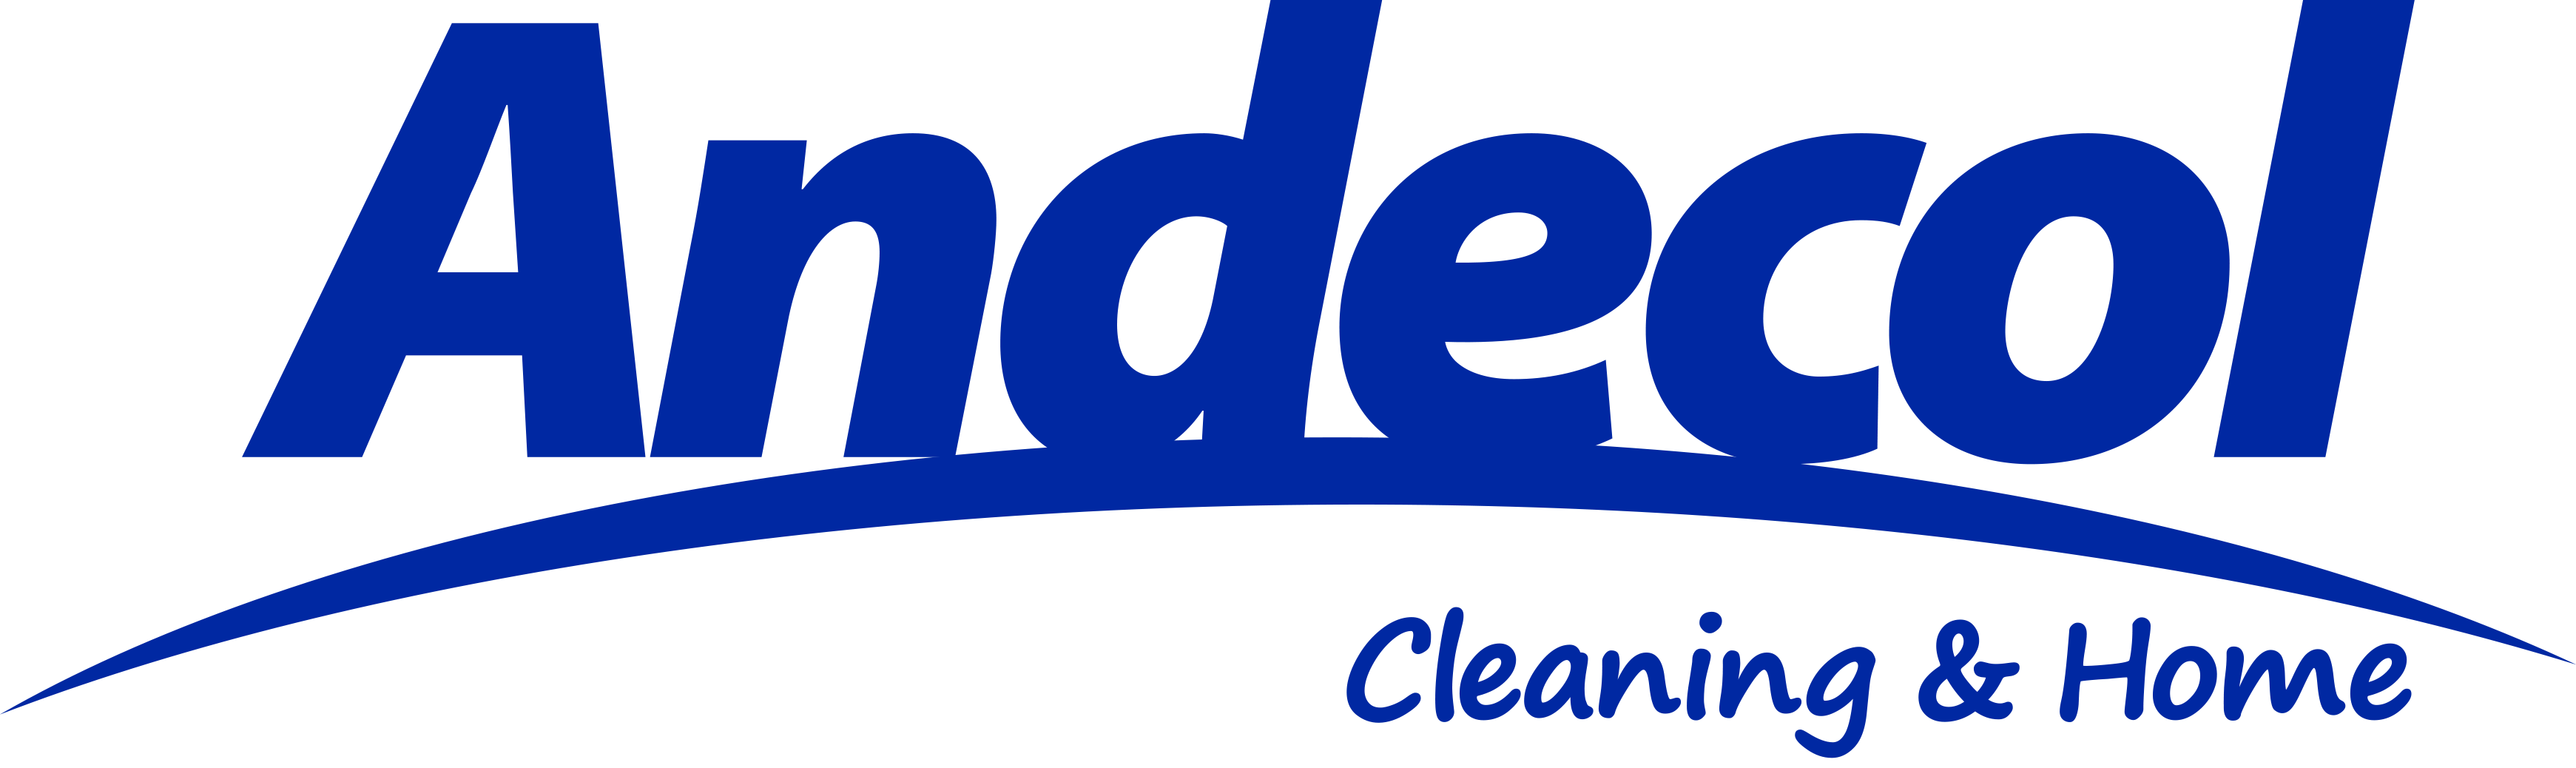 Andecol Cleaning & Home